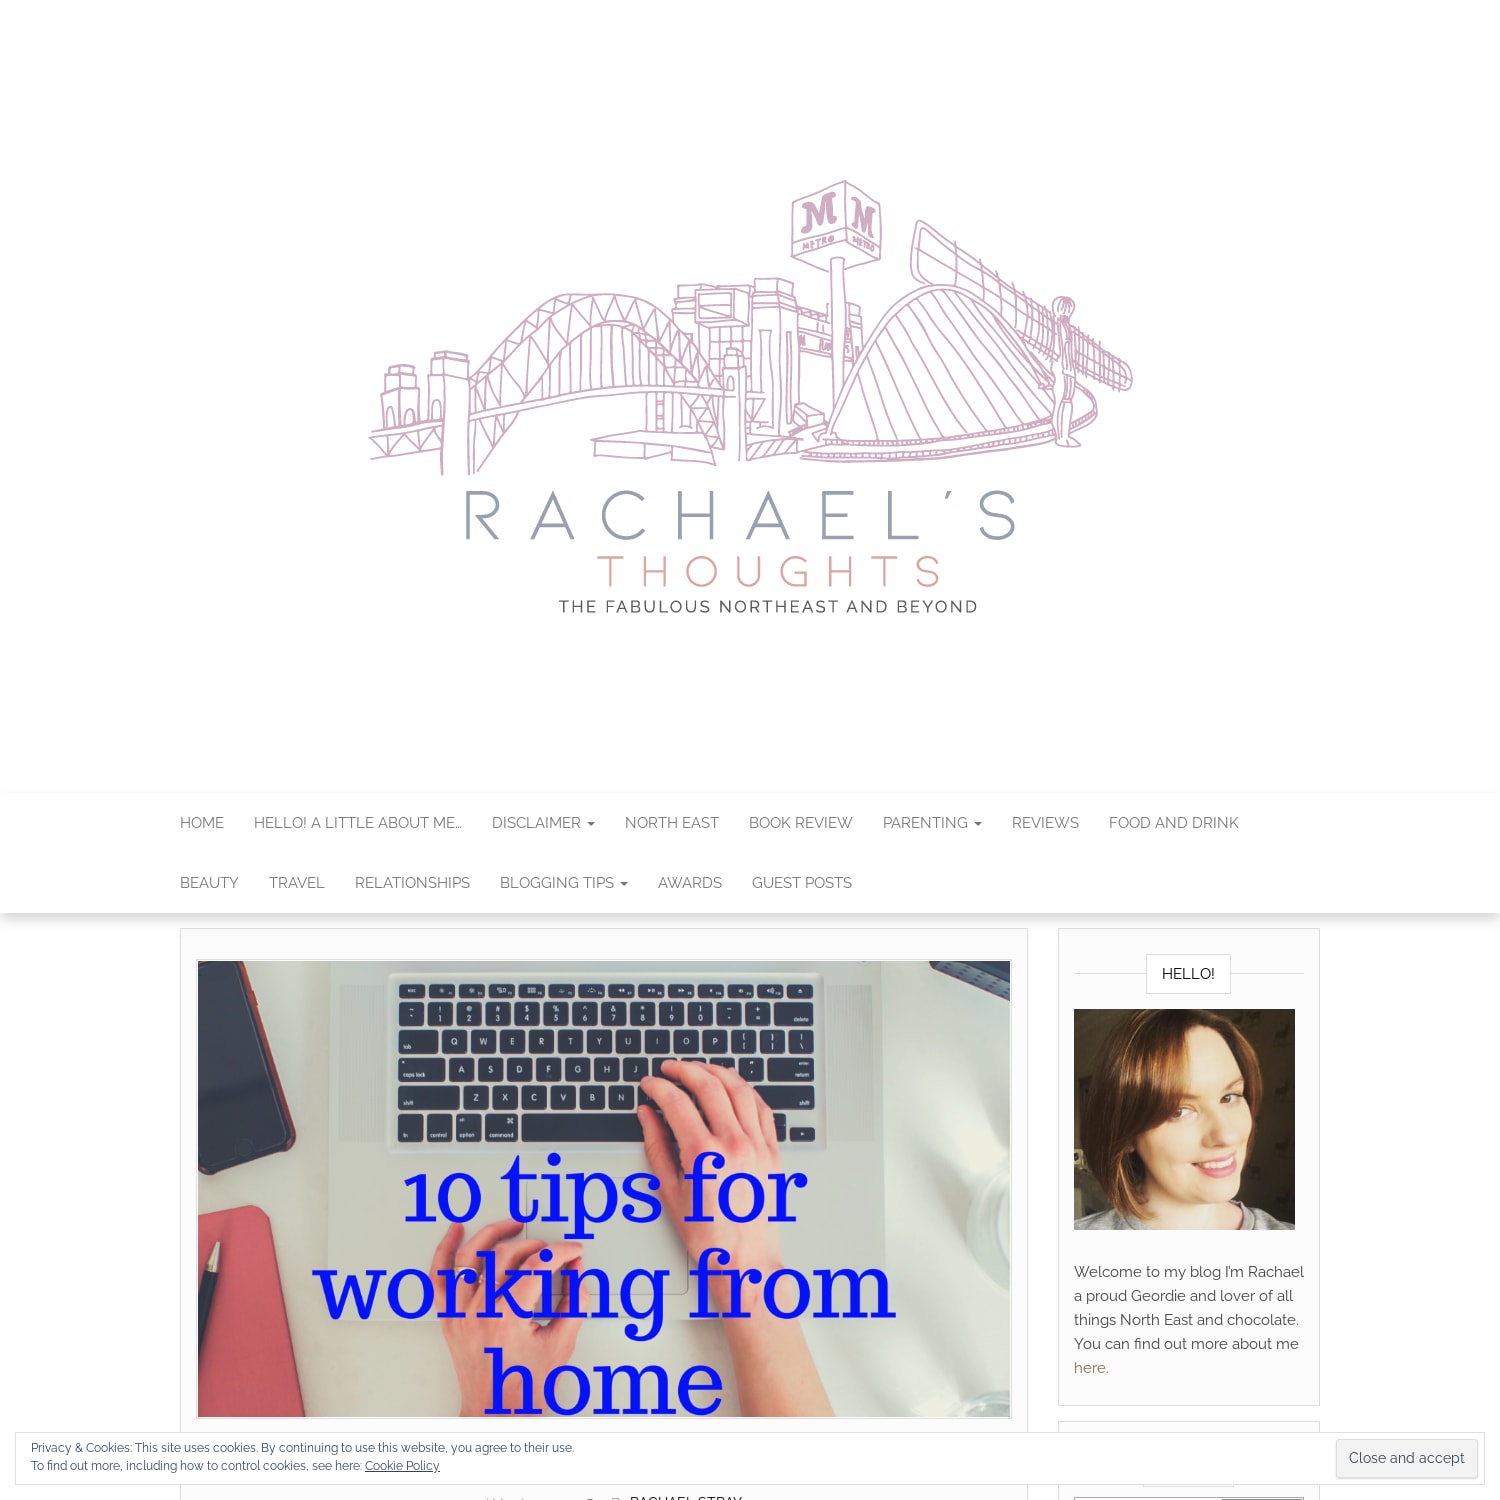 10 tips for working from home - Rachael's Thoughts